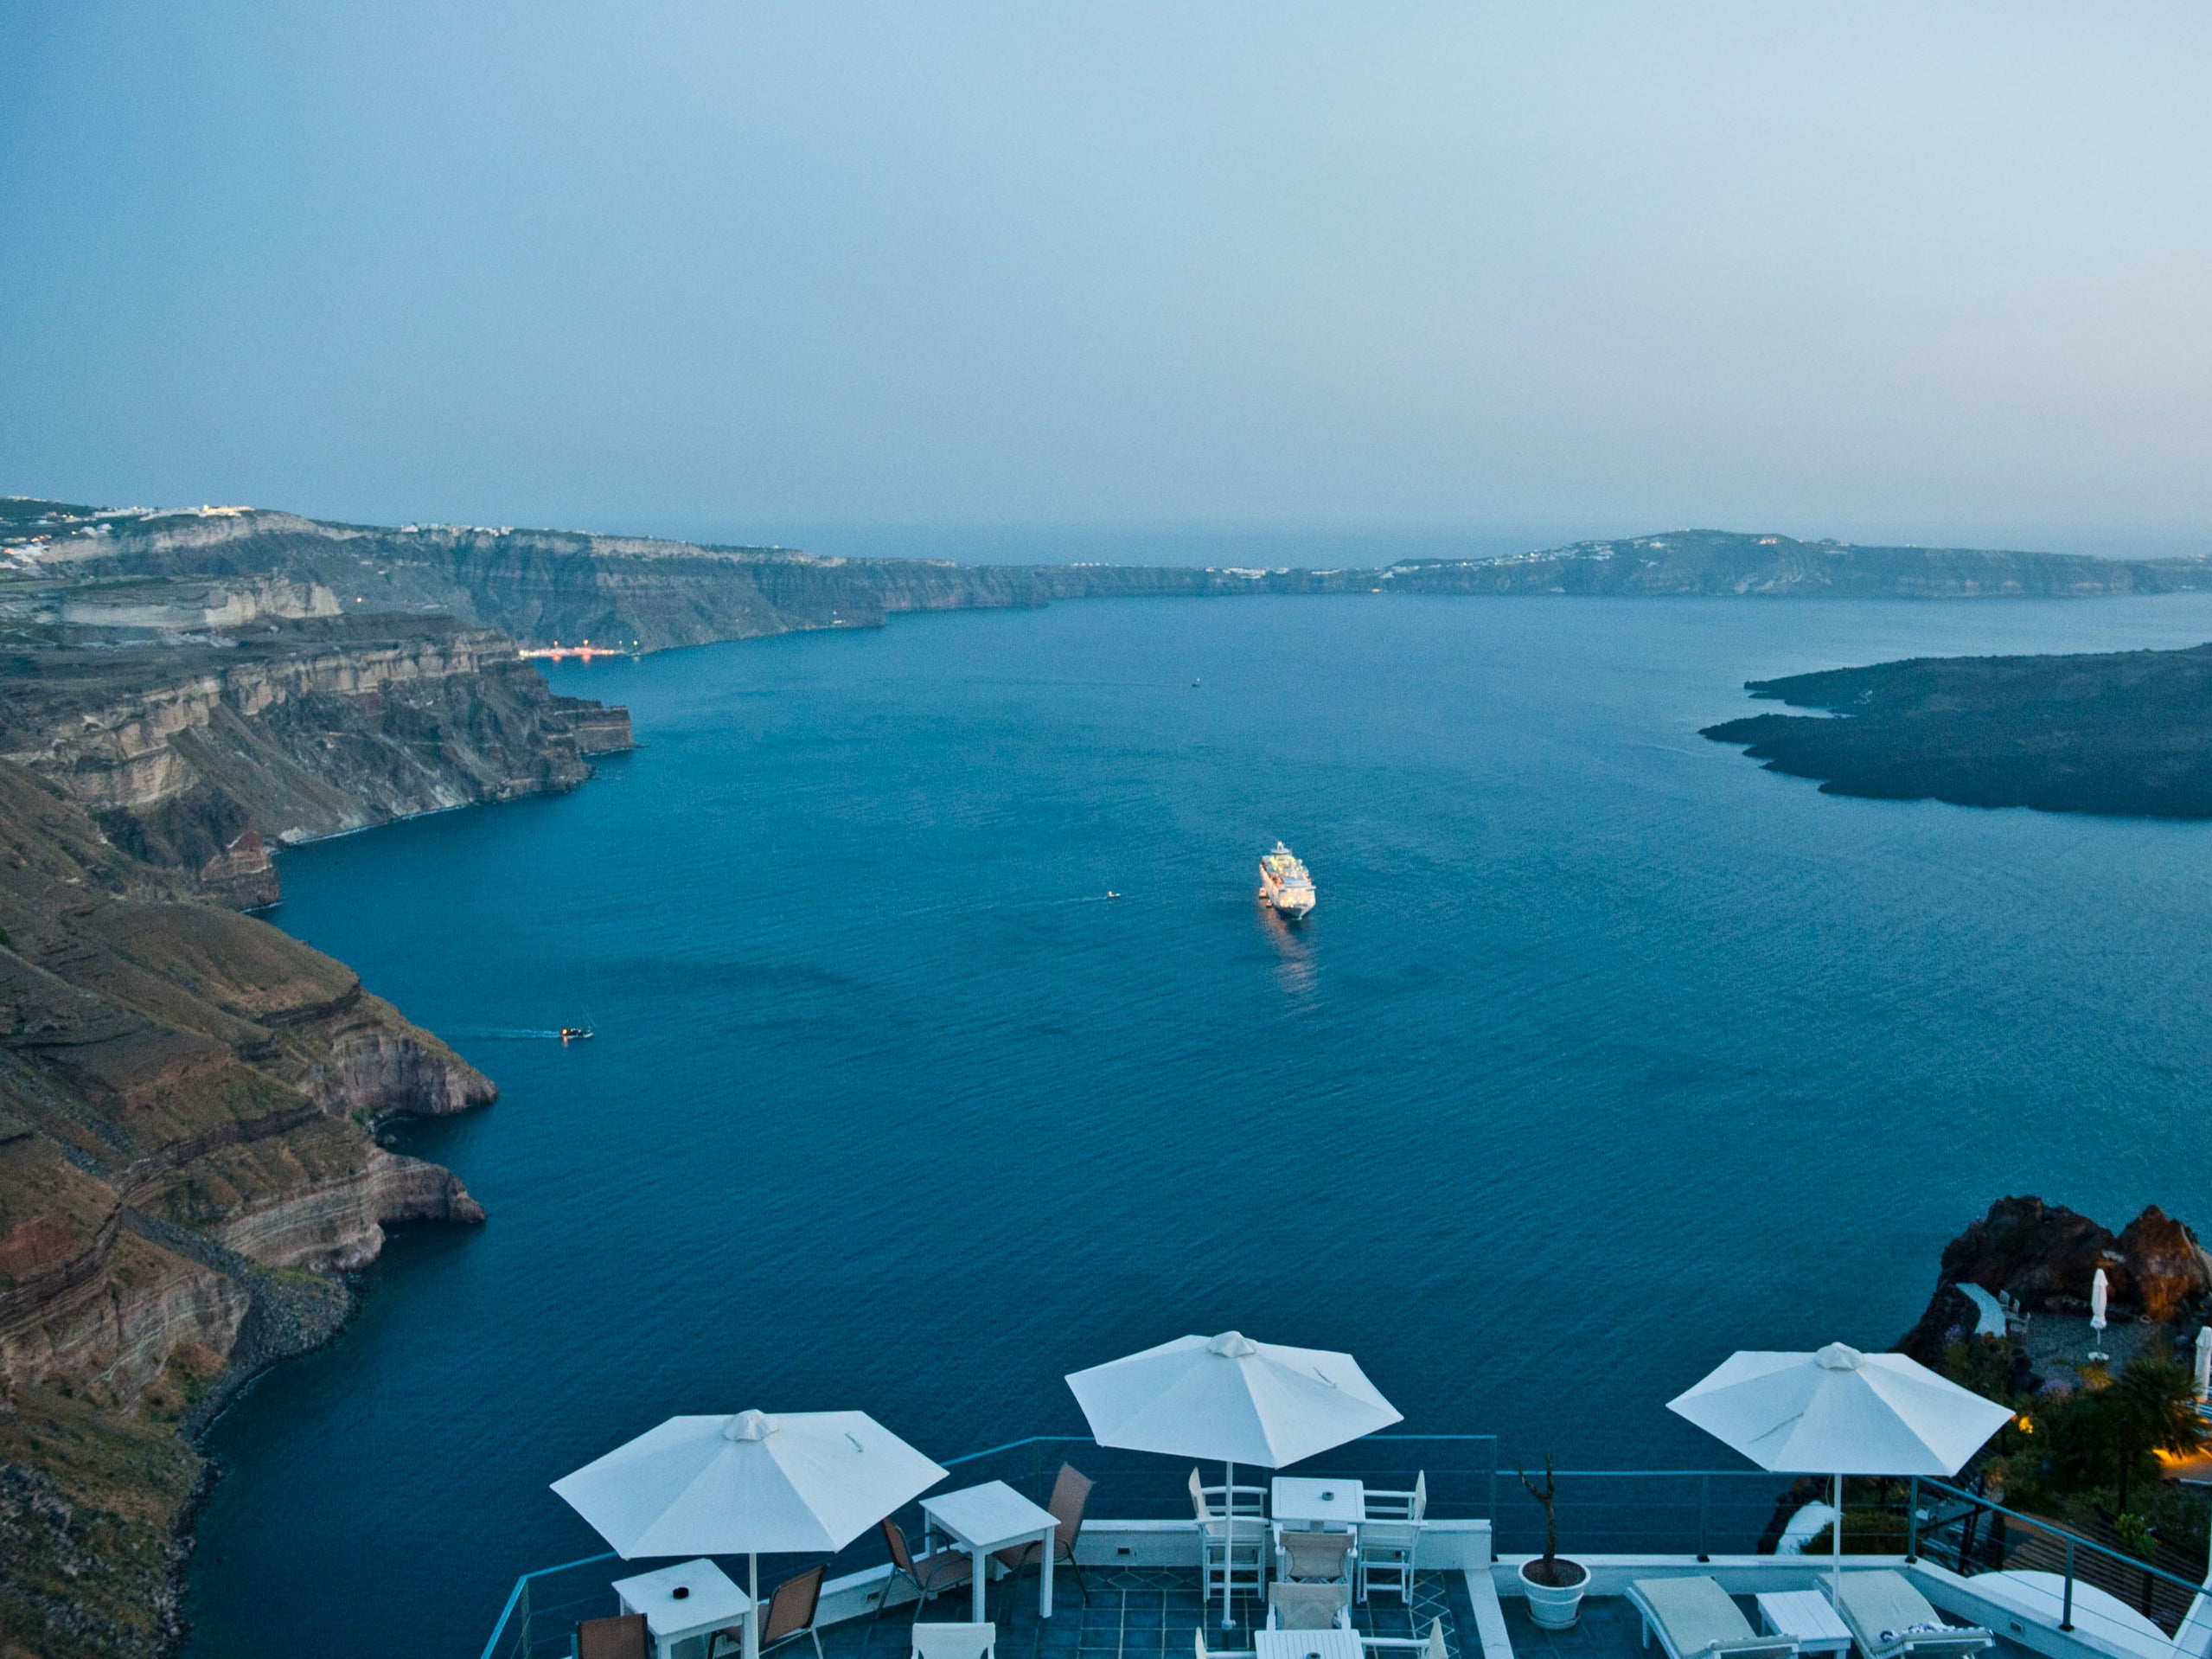 Santorini for its jaw-dropping cliffside views